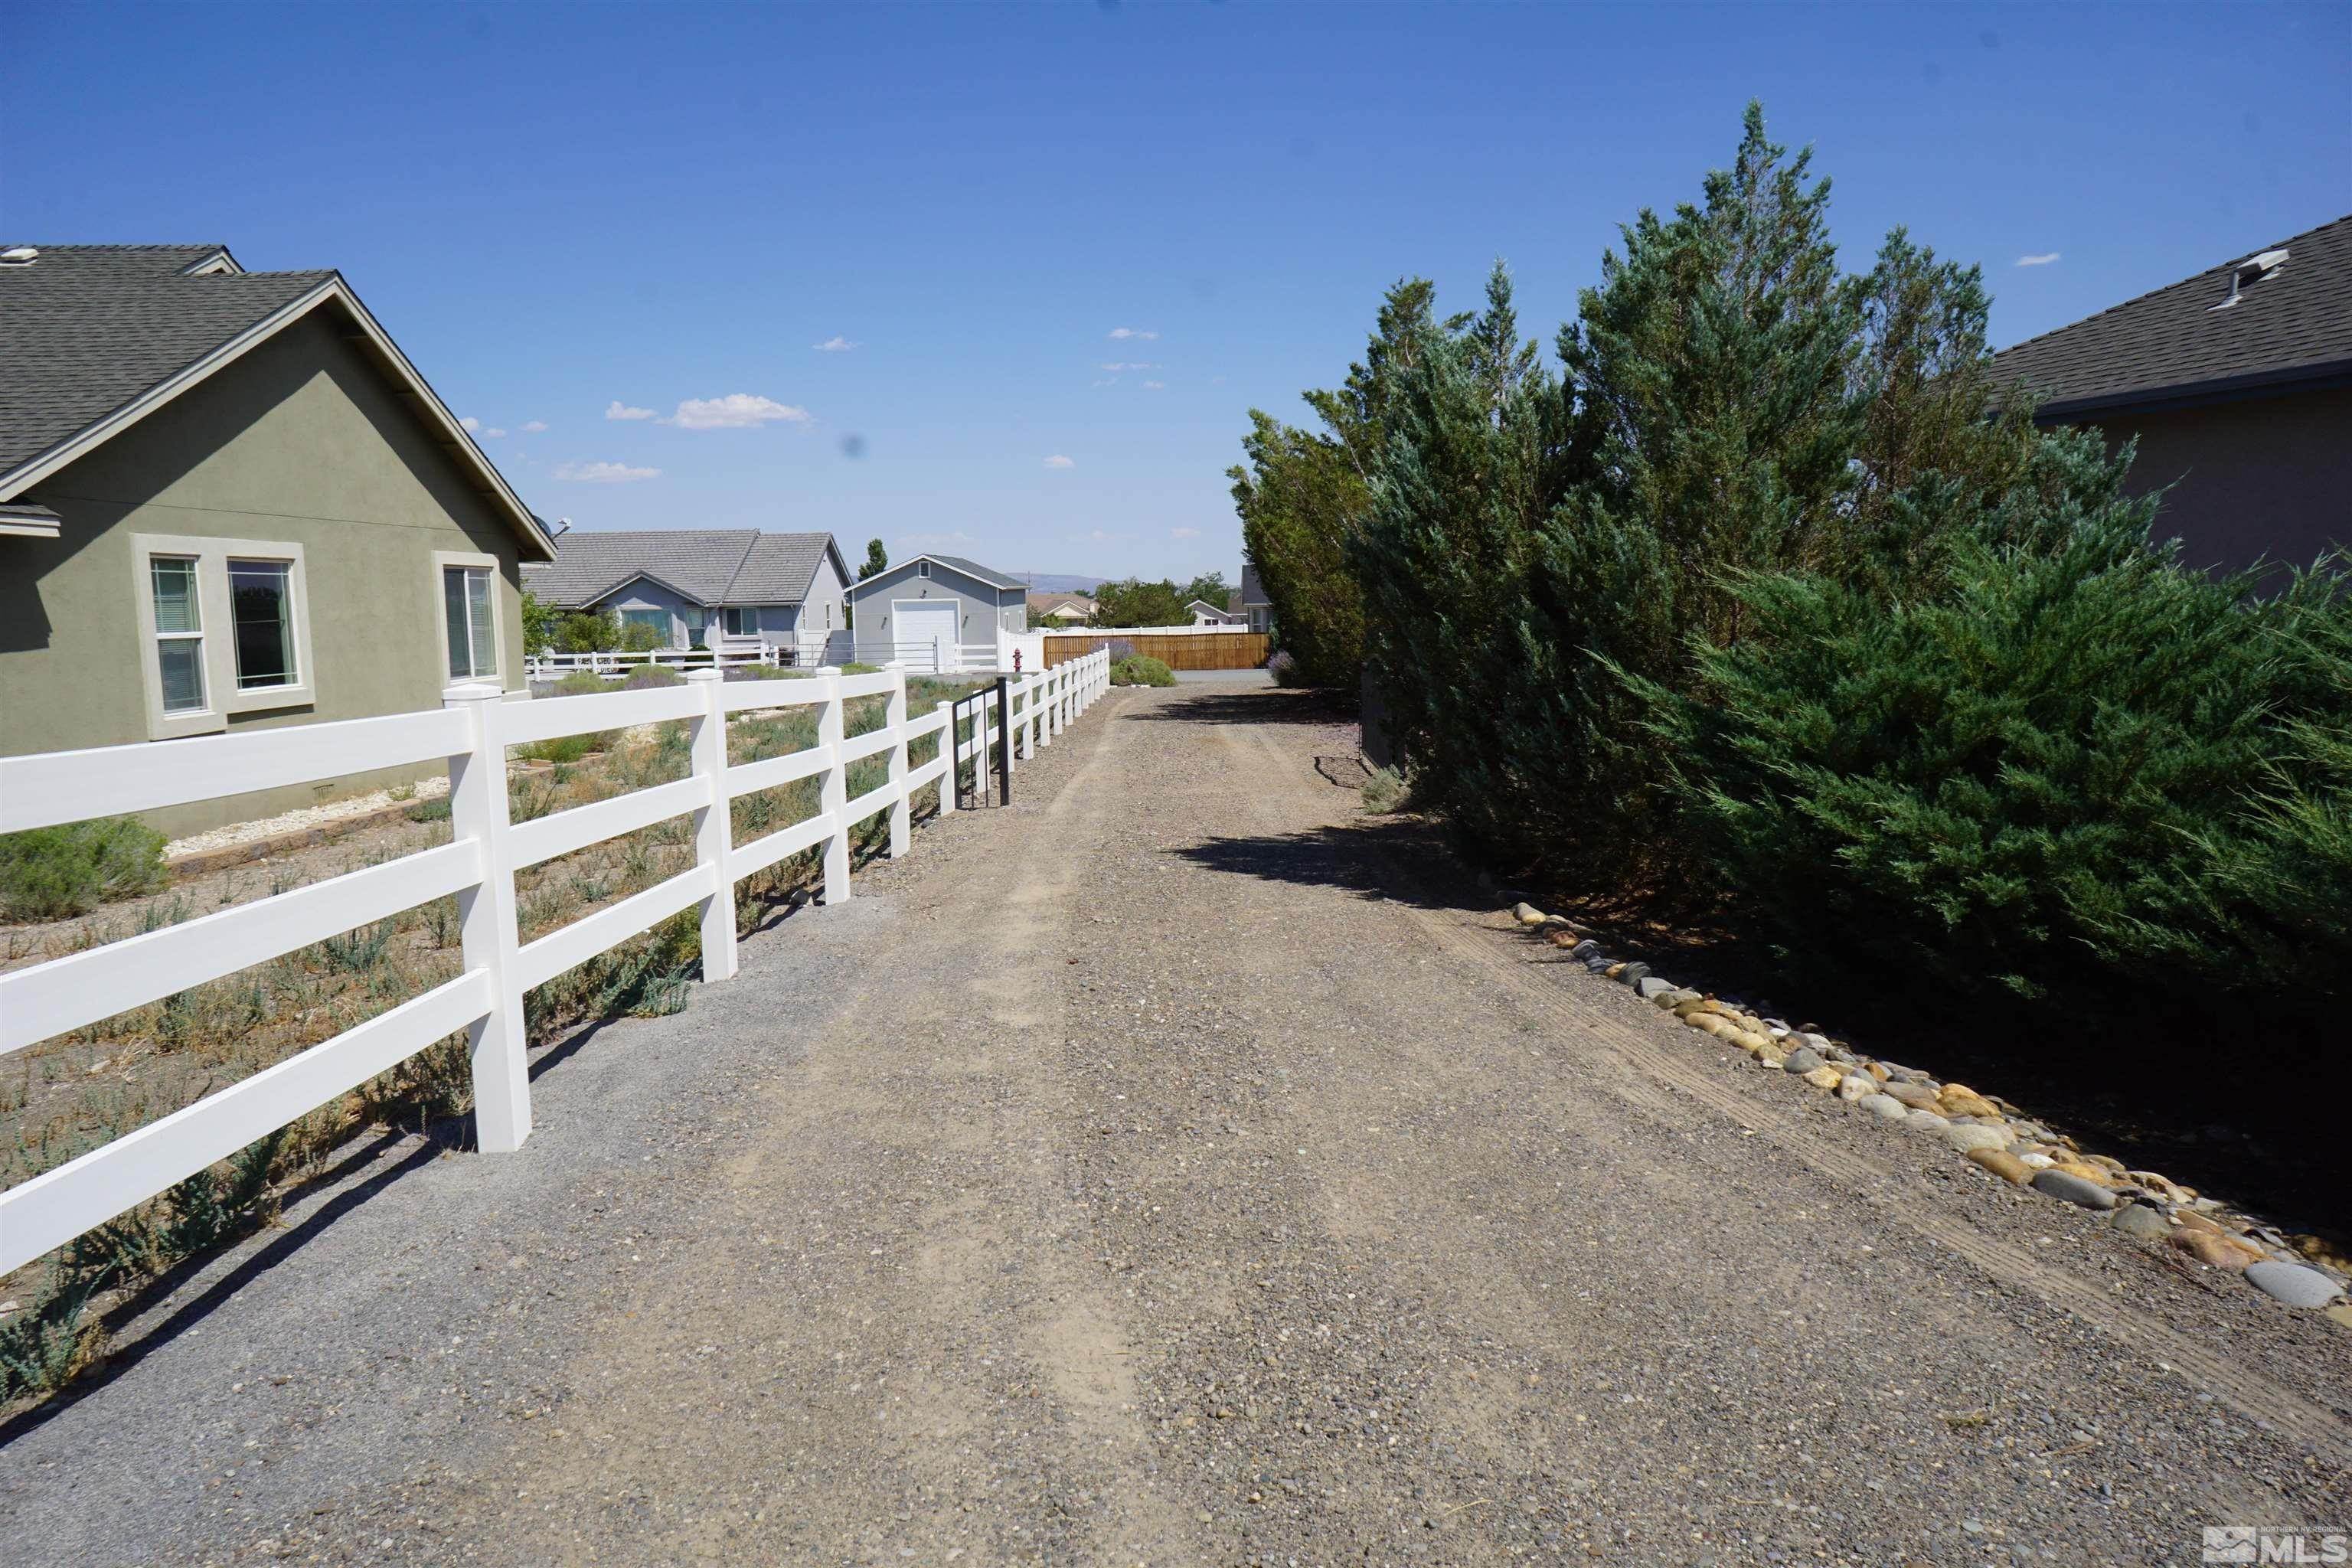 20. Single Family Homes for Active at 650 Buckskin Drive Fernley, Nevada 89408 United States